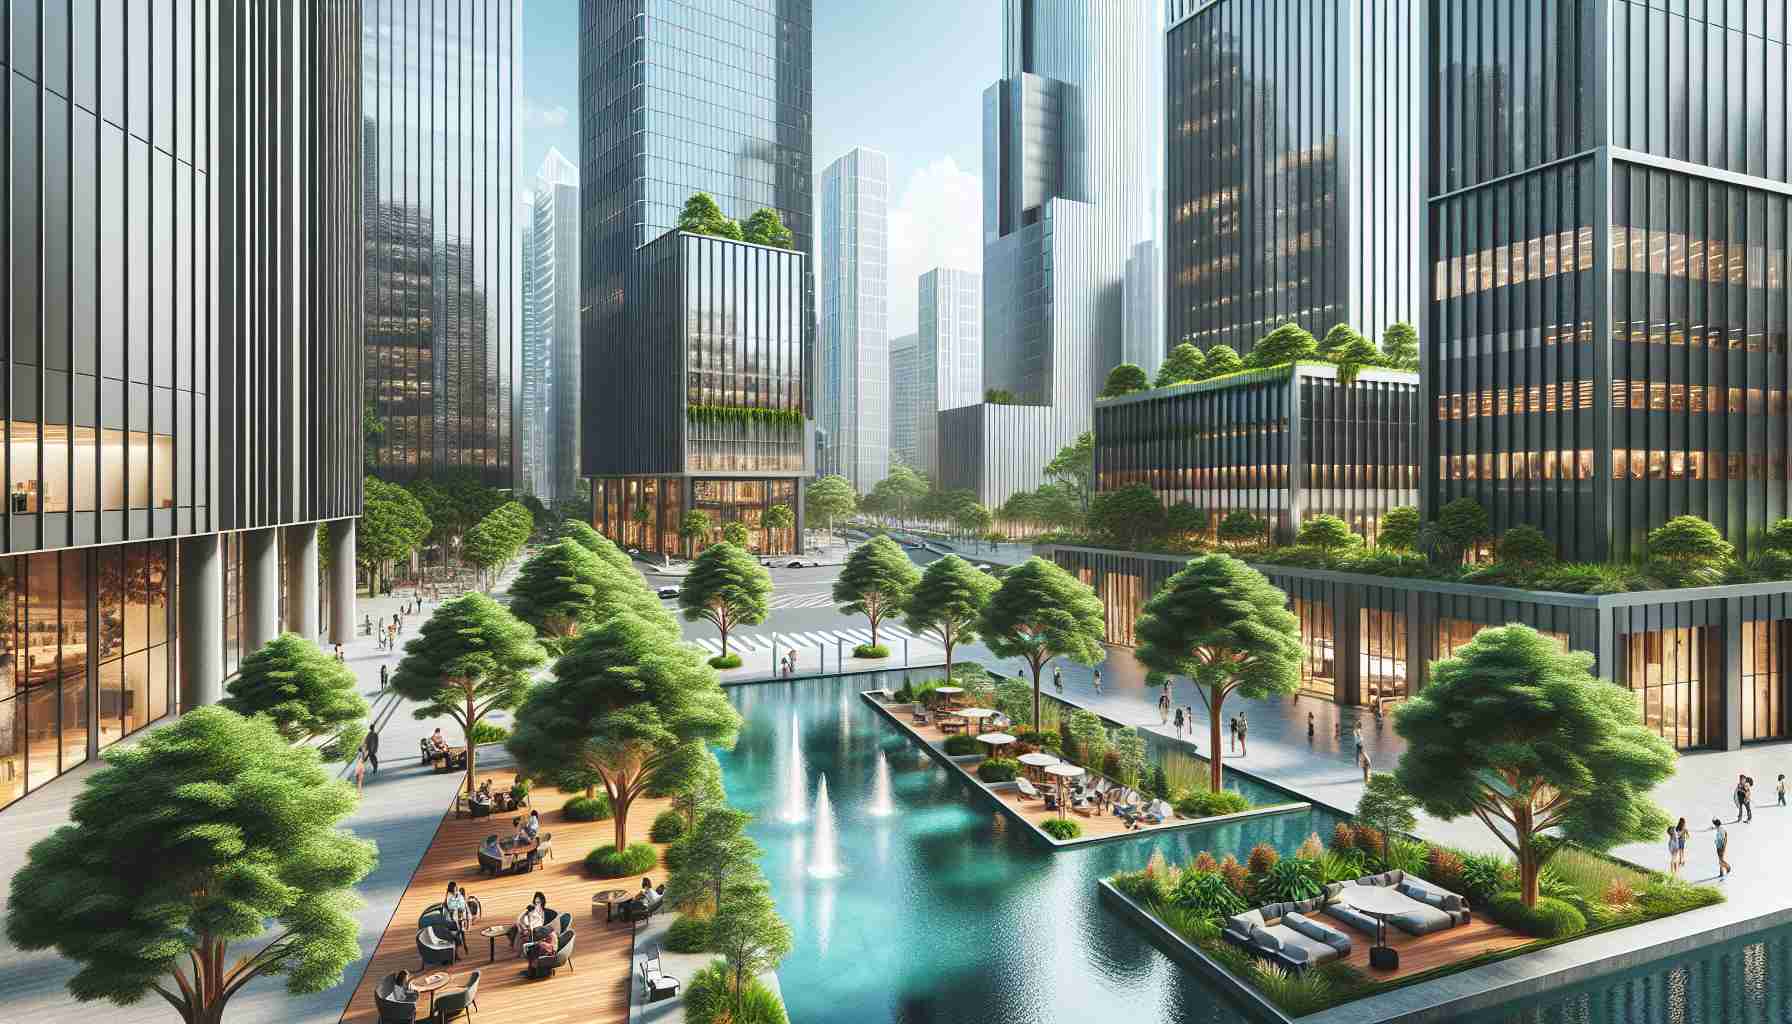 Create a high-definition, realistic image of a modern urban oasis in a generic downtown area. The oasis should feature lush green trees, tranquil water bodies and comfortable seating areas distributed amidst high rise buildings. The scene should portray a seamless coexistence of nature and urban elements, providing a hint of tranquility in the bustling city. Please include people of various races and genders going about their day, to add life to the image.